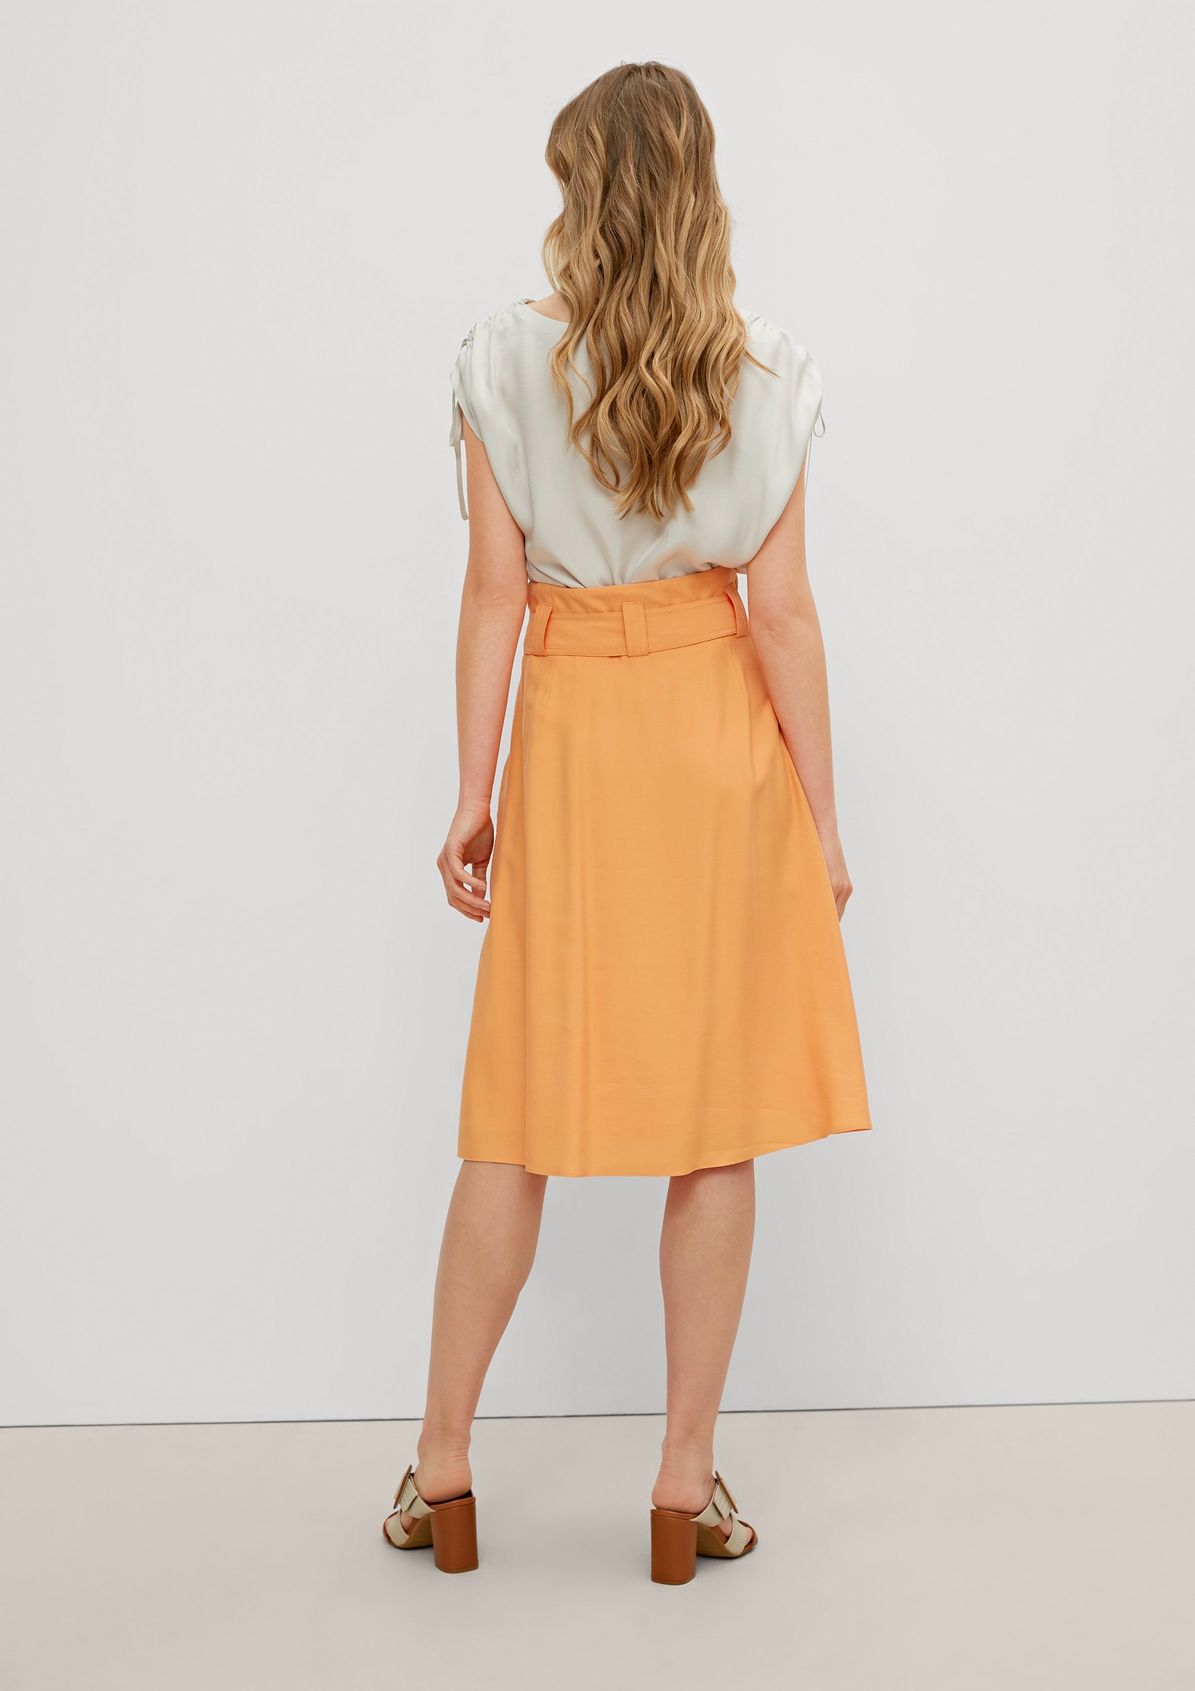 Midi skirt with a hook clasp from comma